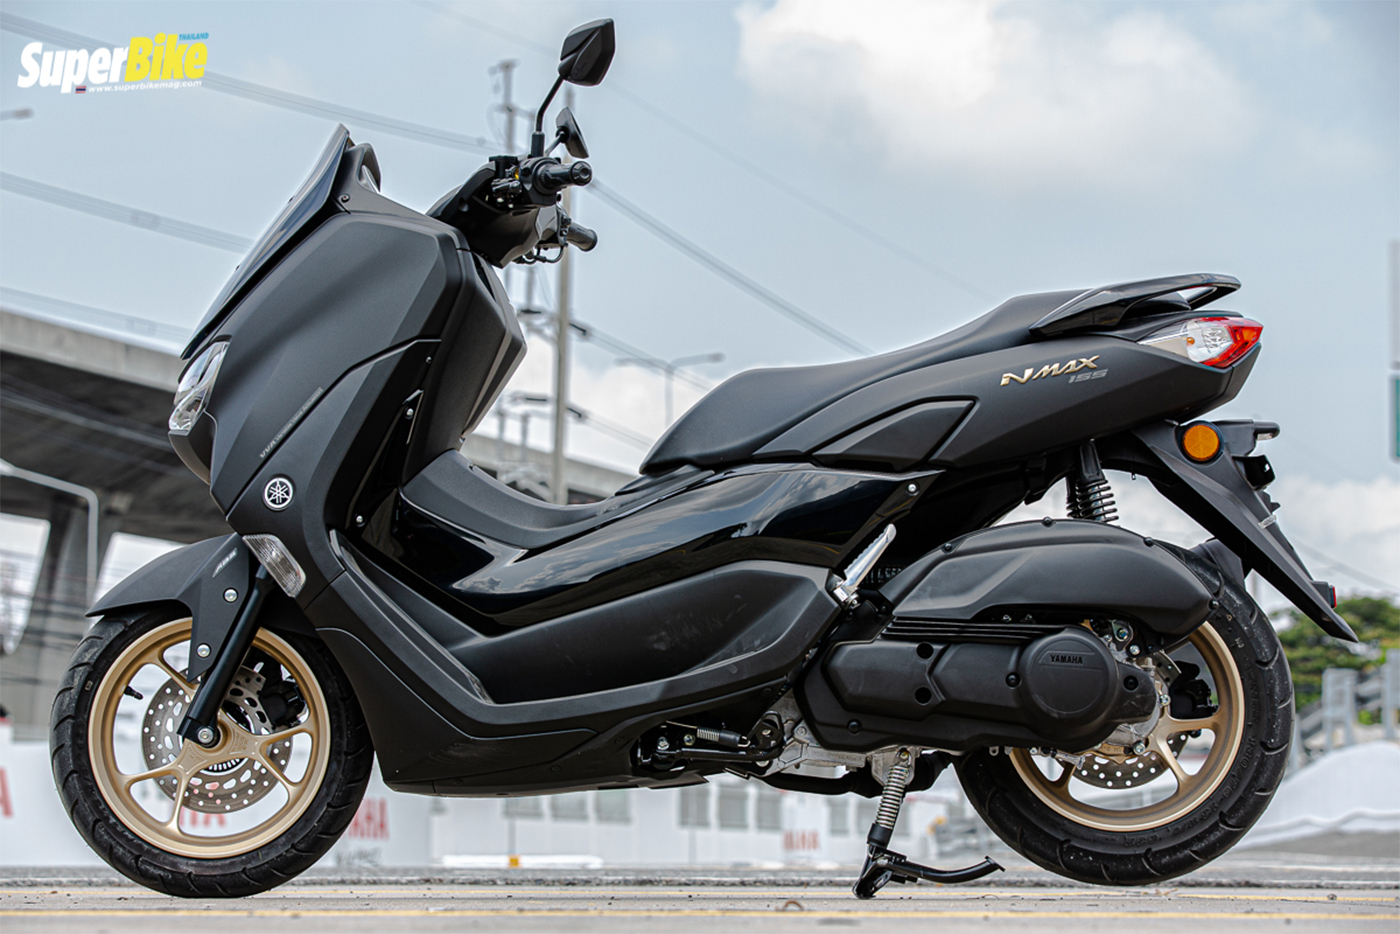 Comparison of Yamaha NMax 155 ABS 2020 and its predecessor yamaha-nmax-155-abs-2020-13.jpg